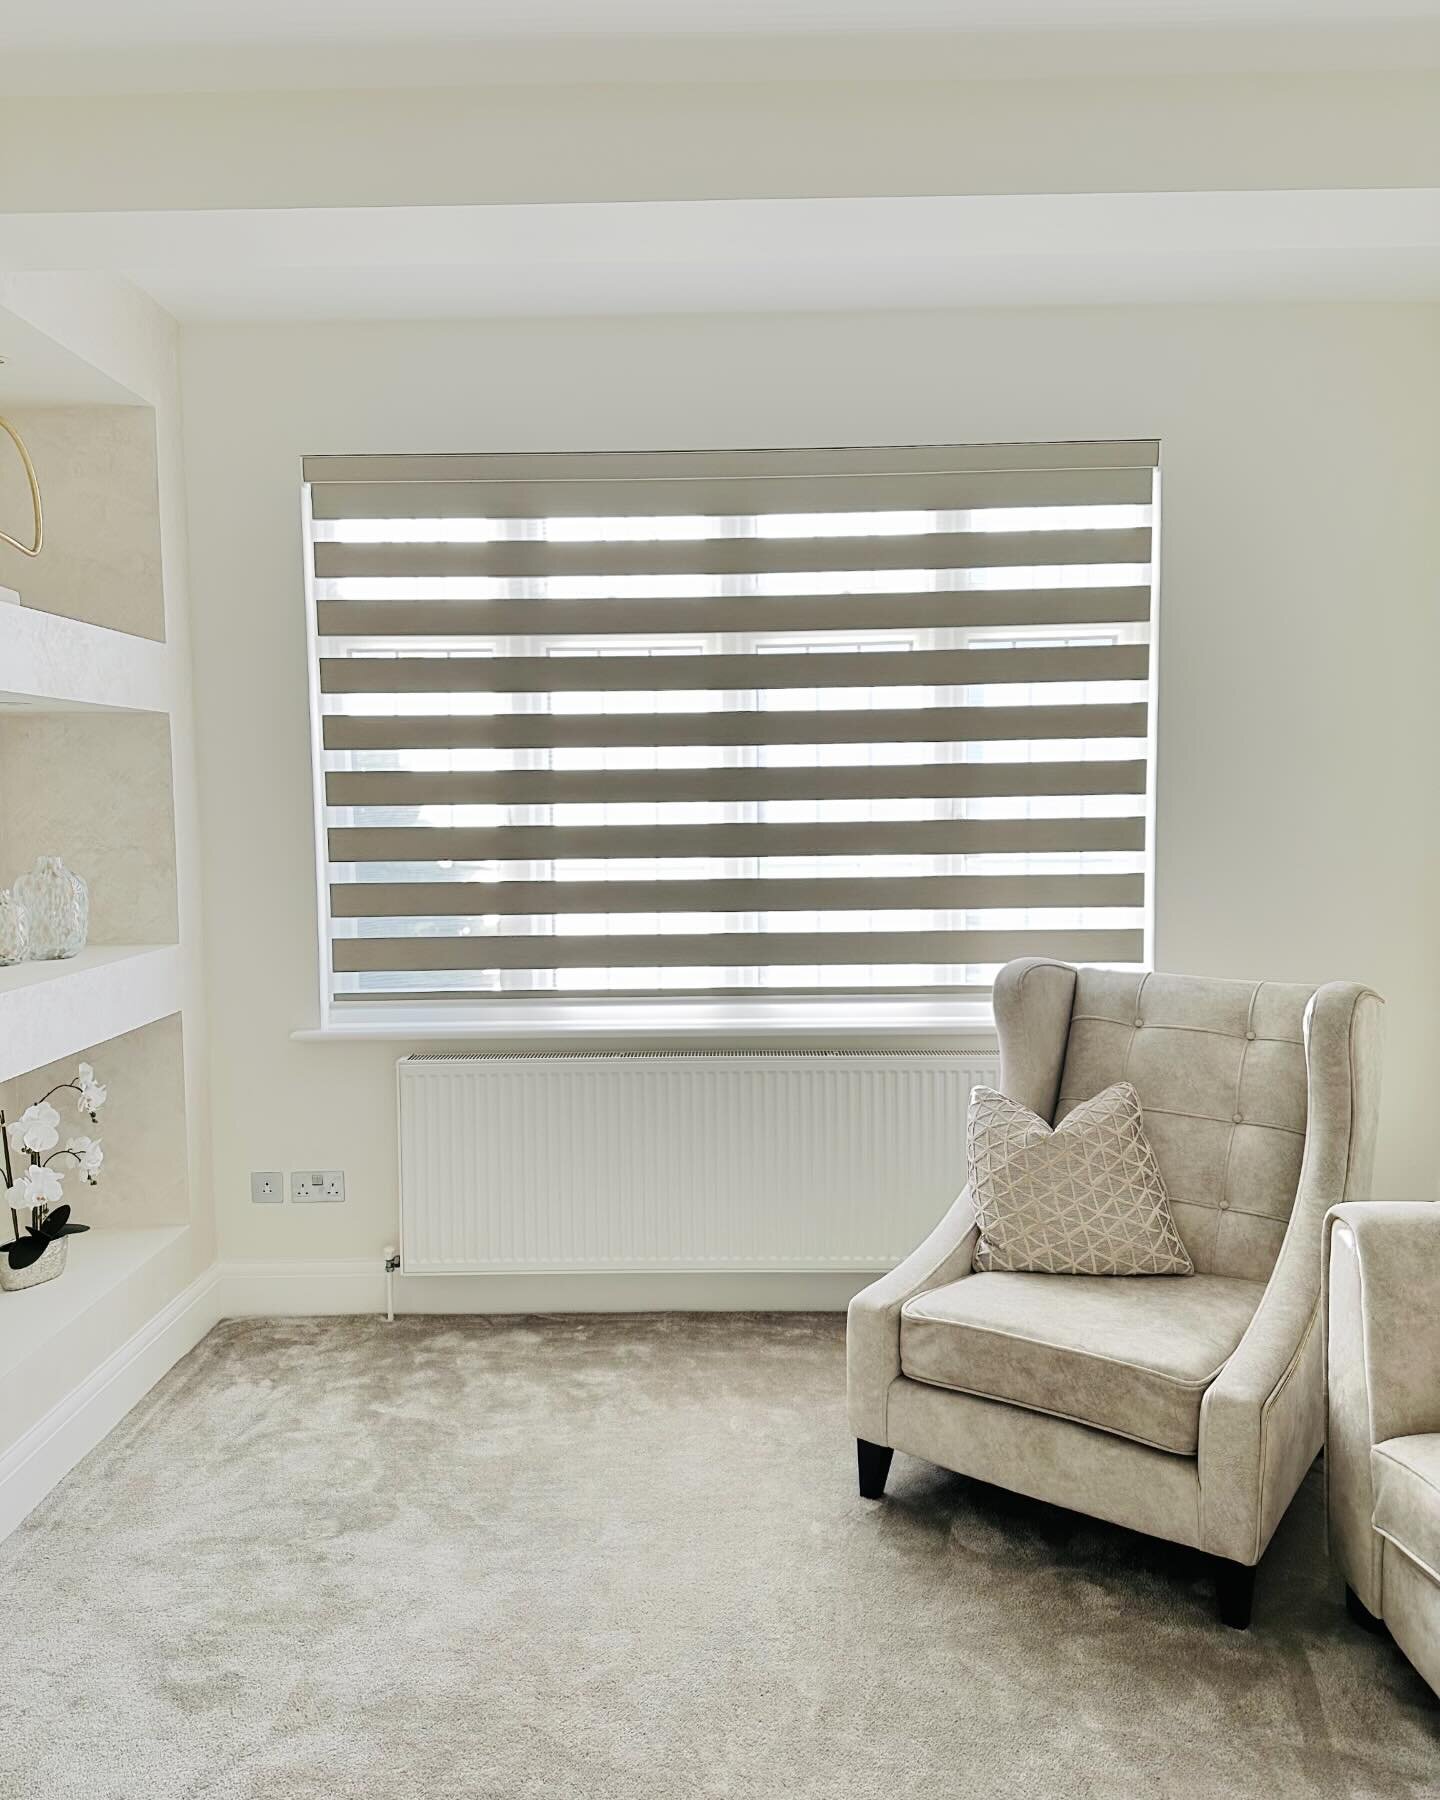 S H A D E S  A N D  D R A P E S 🩶

M O T O R I S E D  V I S I O N  B L I N D S /
D A Y  A N D  N I G H T  B L I N D S 

Controlling the light while maintaining the view, create an impact with our made to measure Vision Blinds, a striking new window 